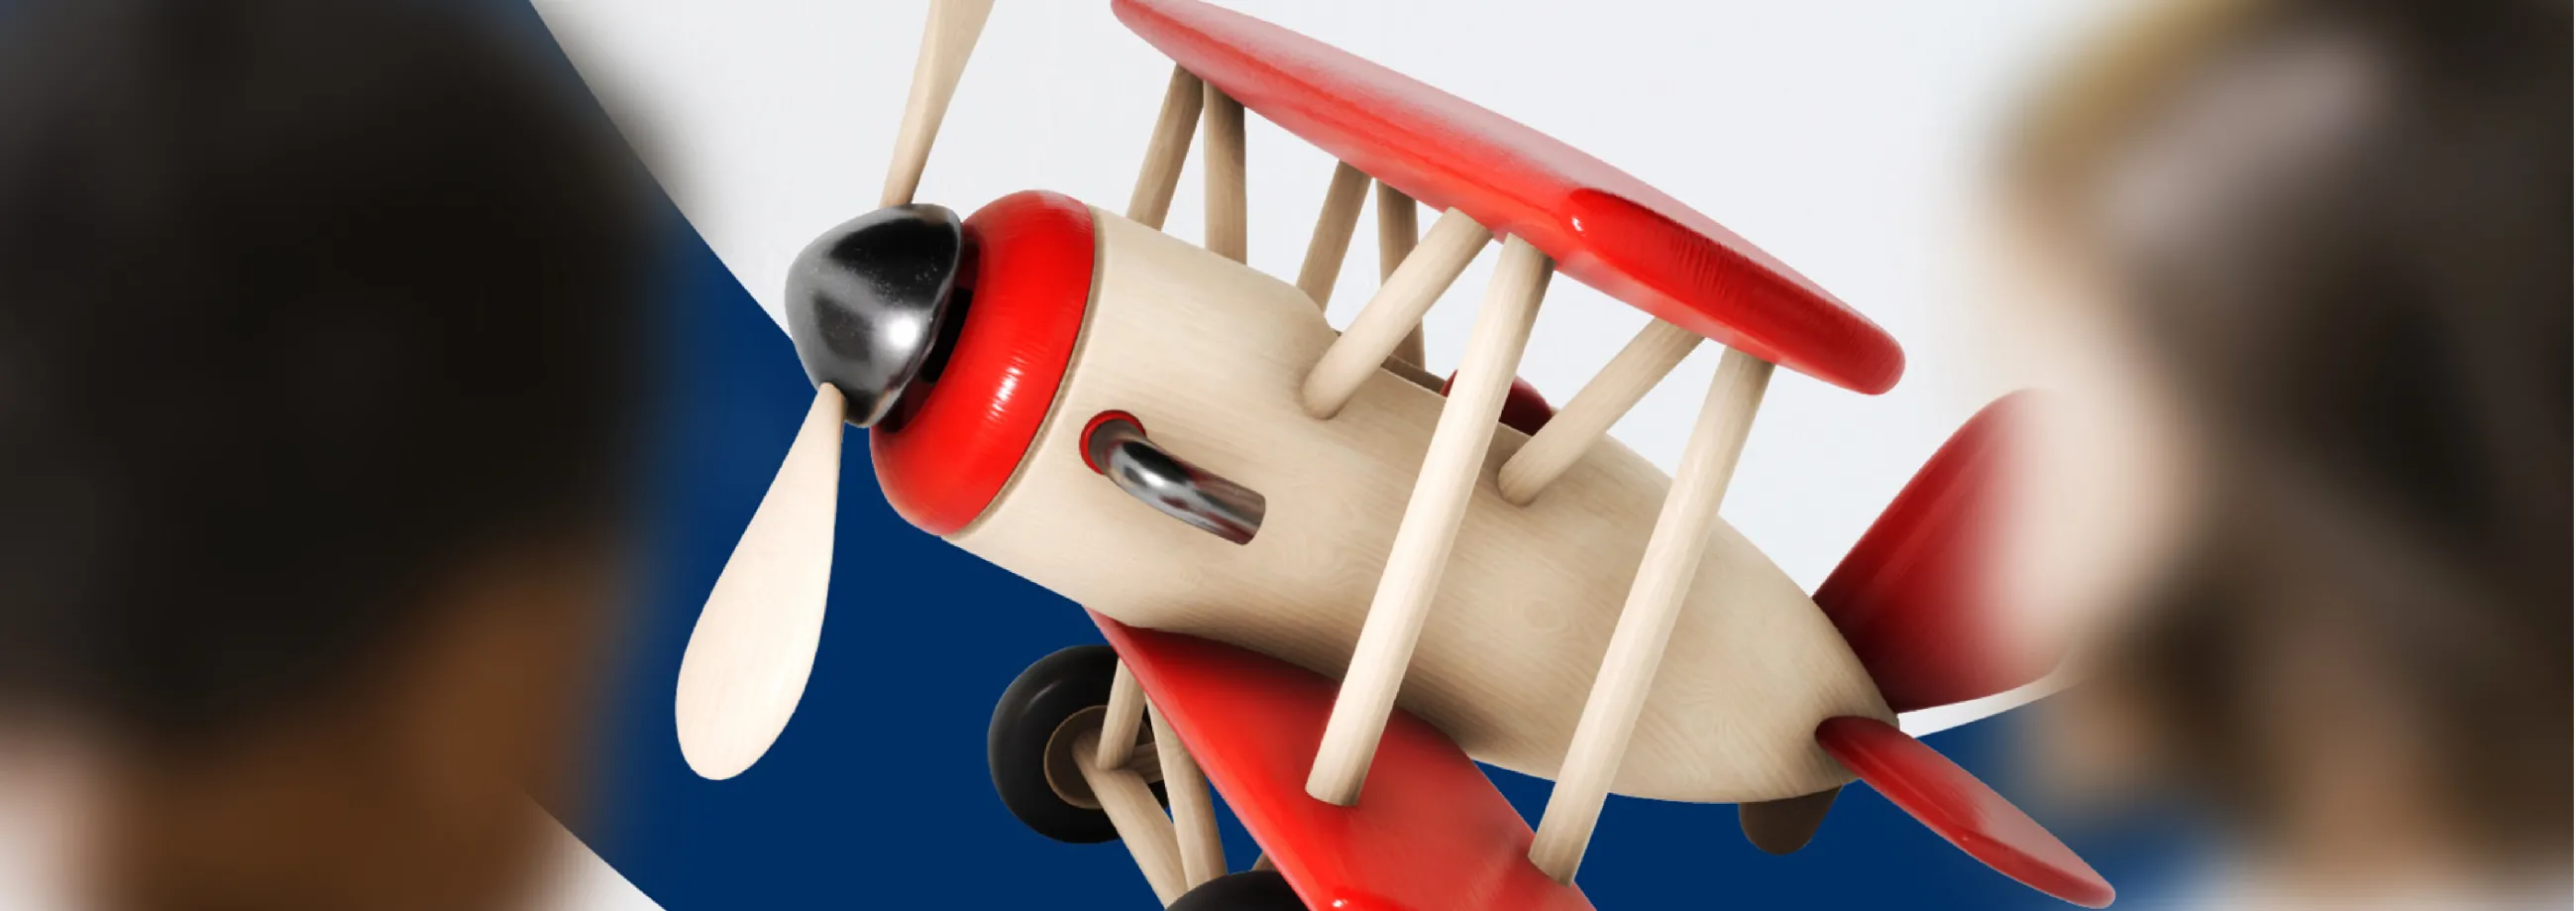  RAFA Kidz brand image showing small wooden propeller plane and two kids along with bright graphics in red and navy blue